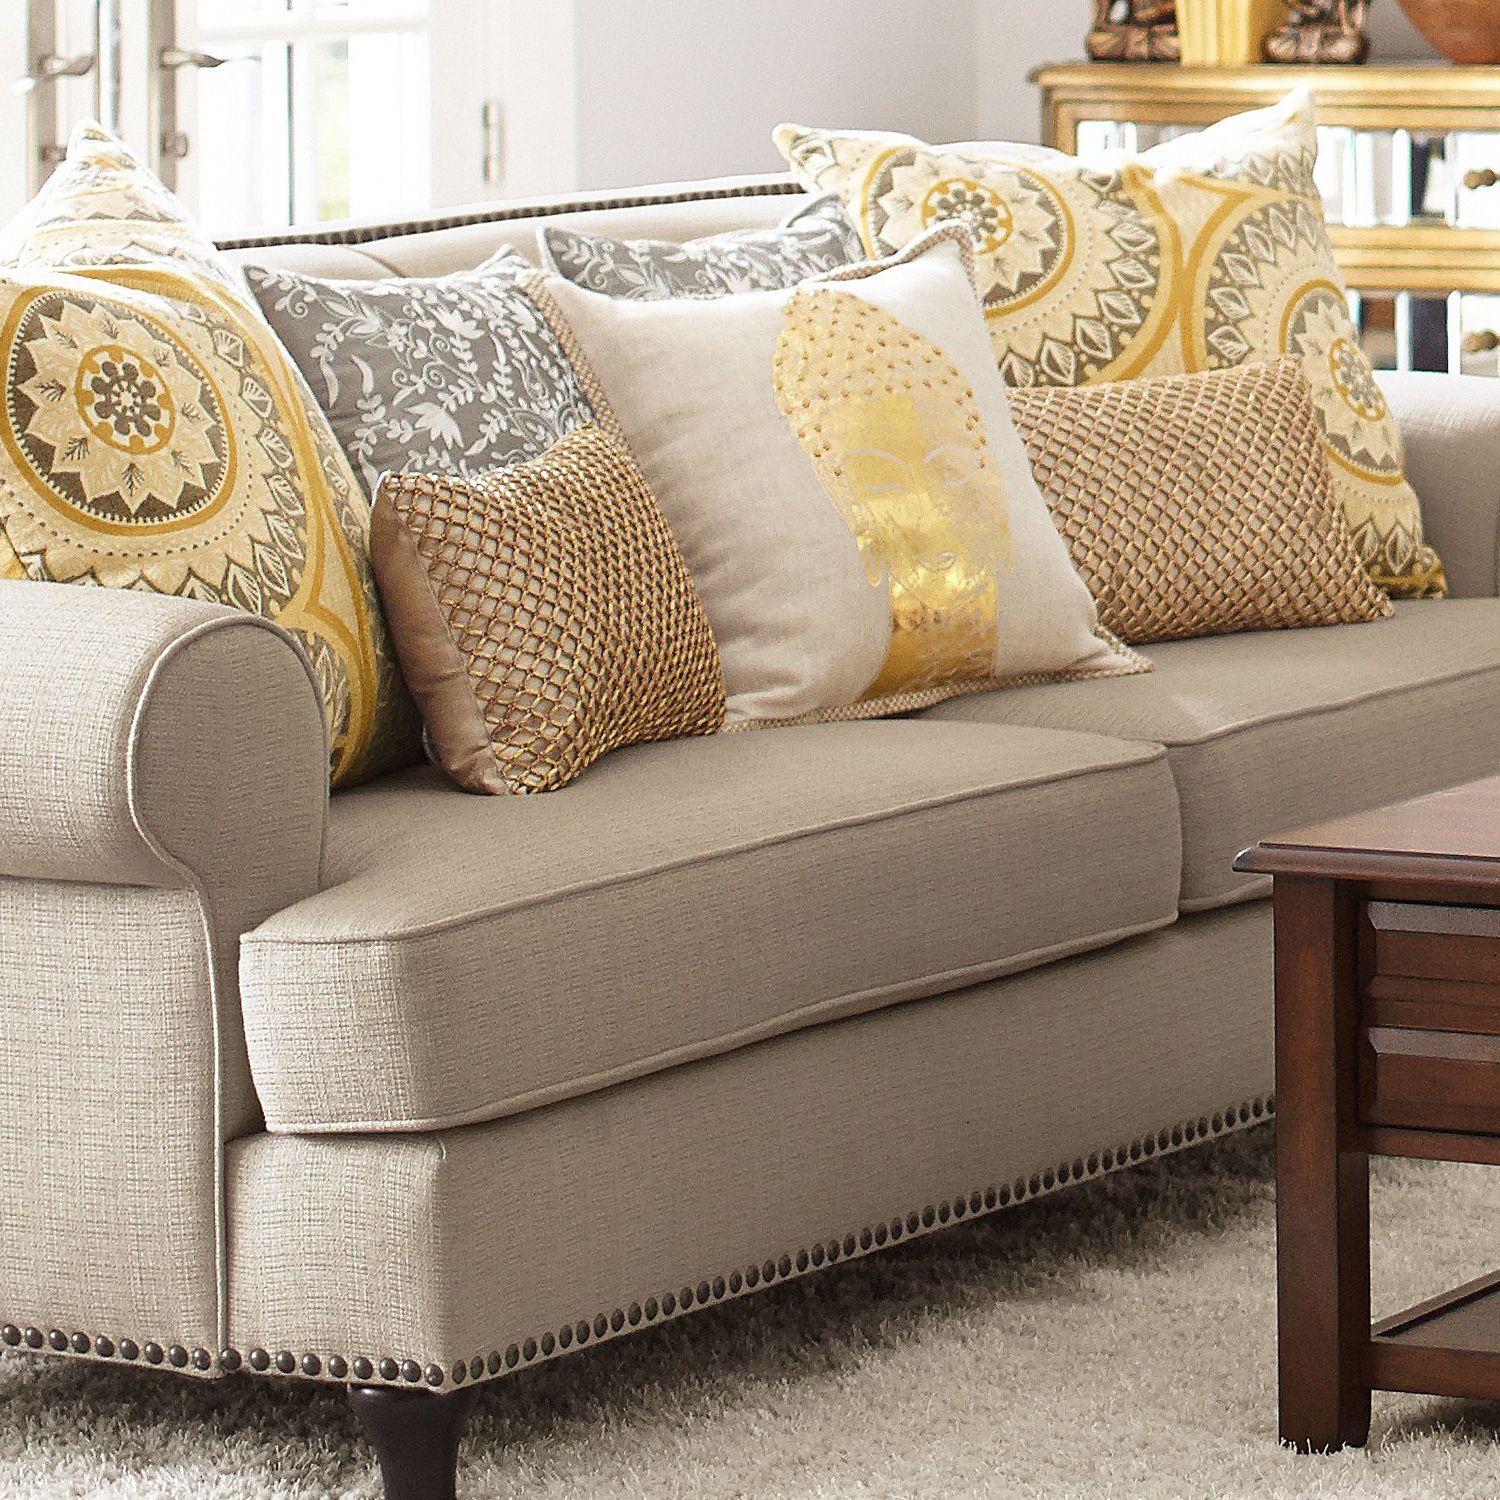 Famous Sofas In Beige Inside Metallic Gold Pillows! Eeep! (View 10 of 15)